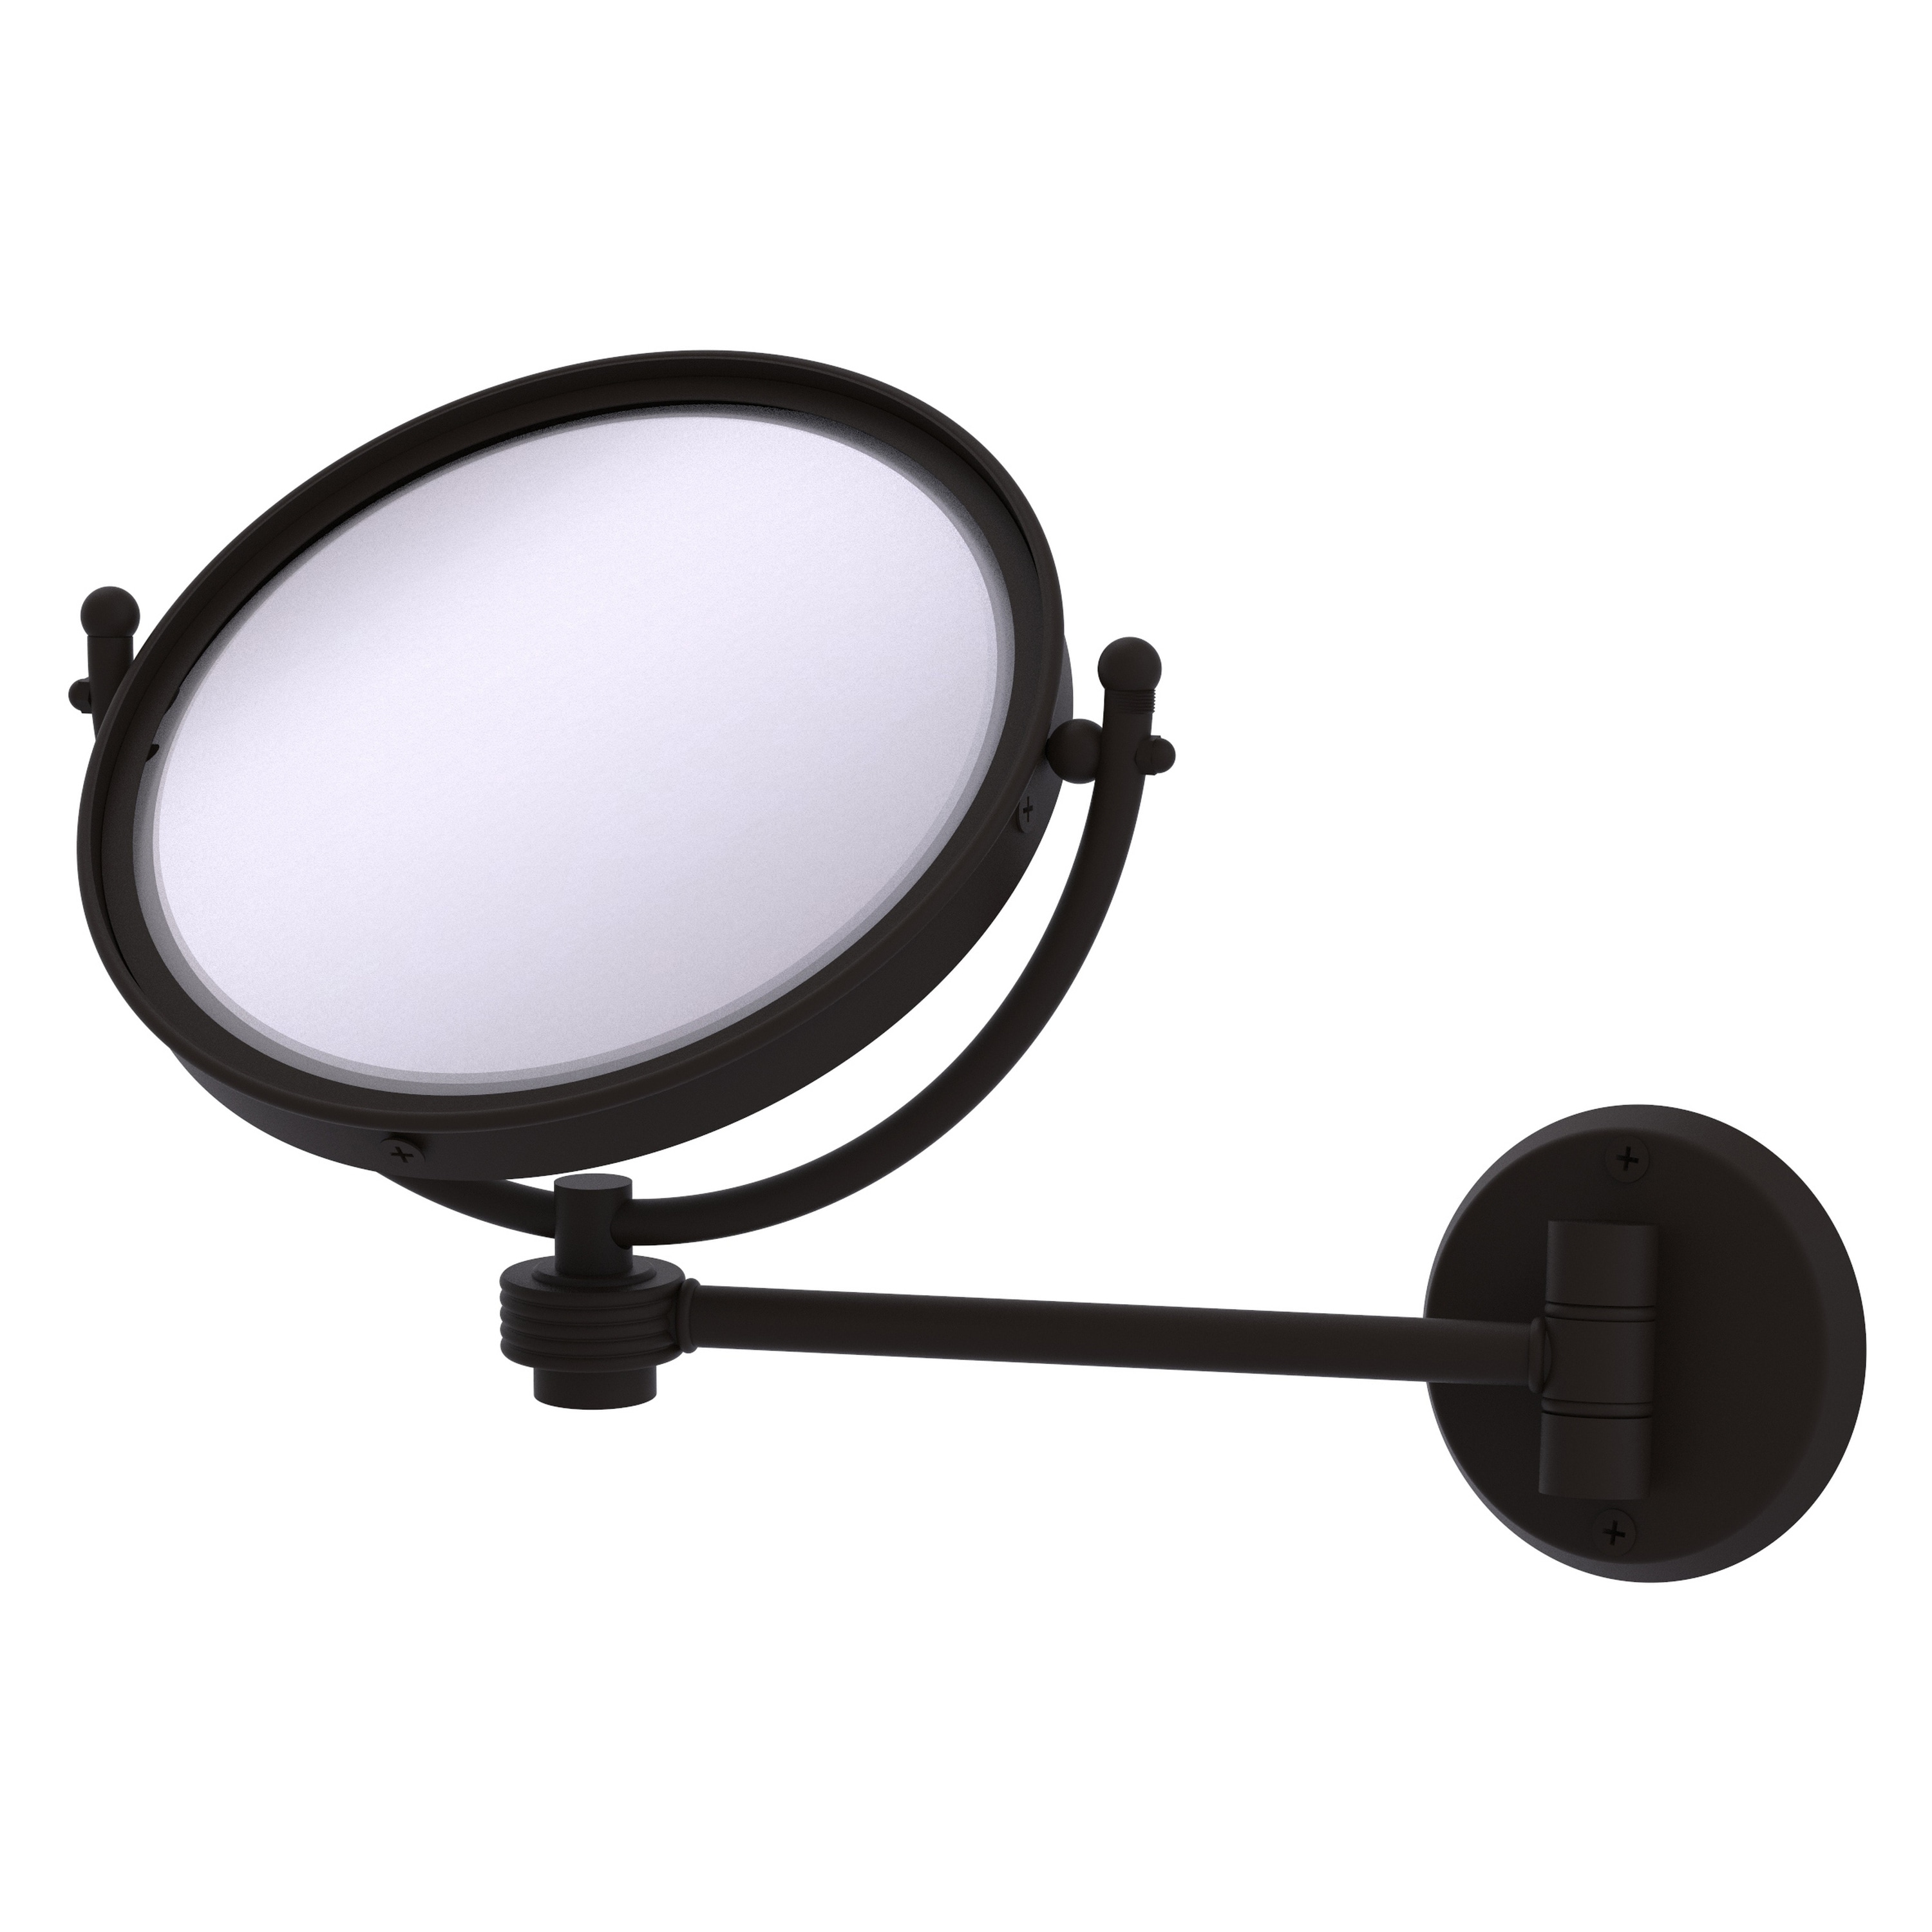 8-in x 10-in Oil-Rubbed Chrome Double-sided 5X Magnifying Wall-mounted Vanity Mirror | - Allied Brass WM-5G/5X-ORB